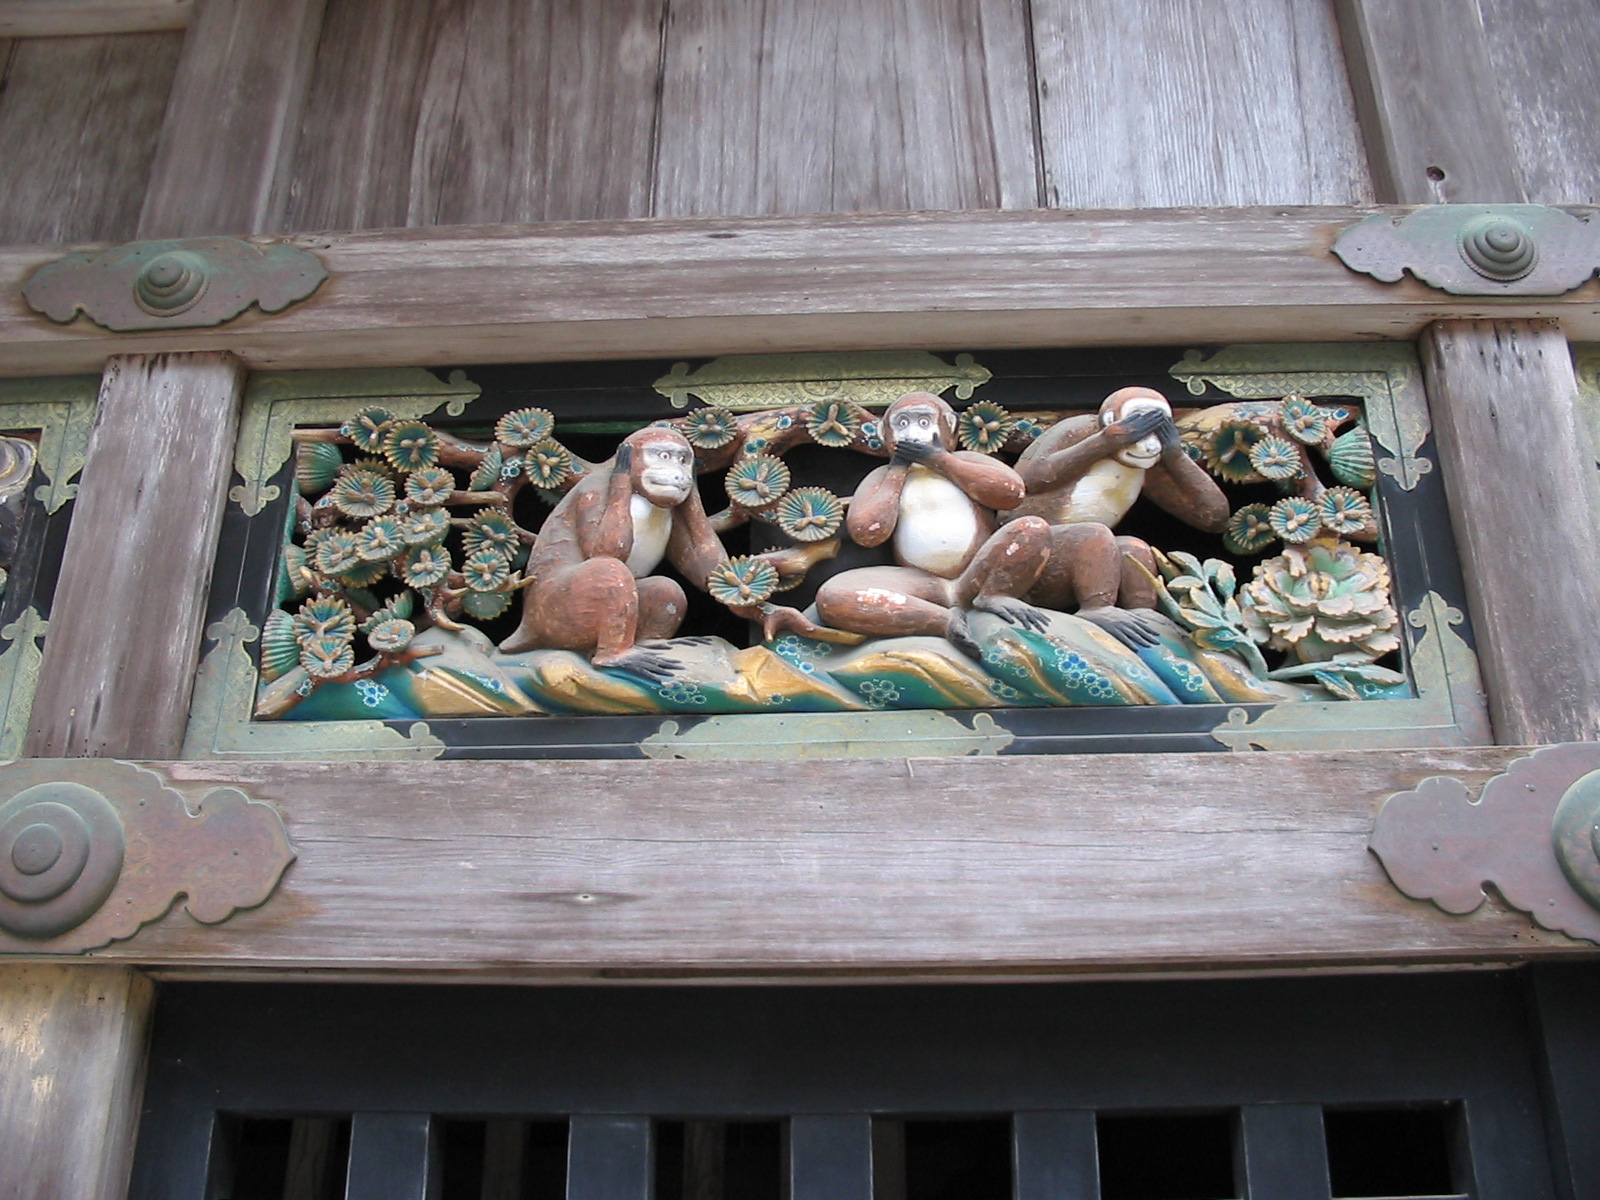 three wooden monkeys holding their ears, mouth, or eyes